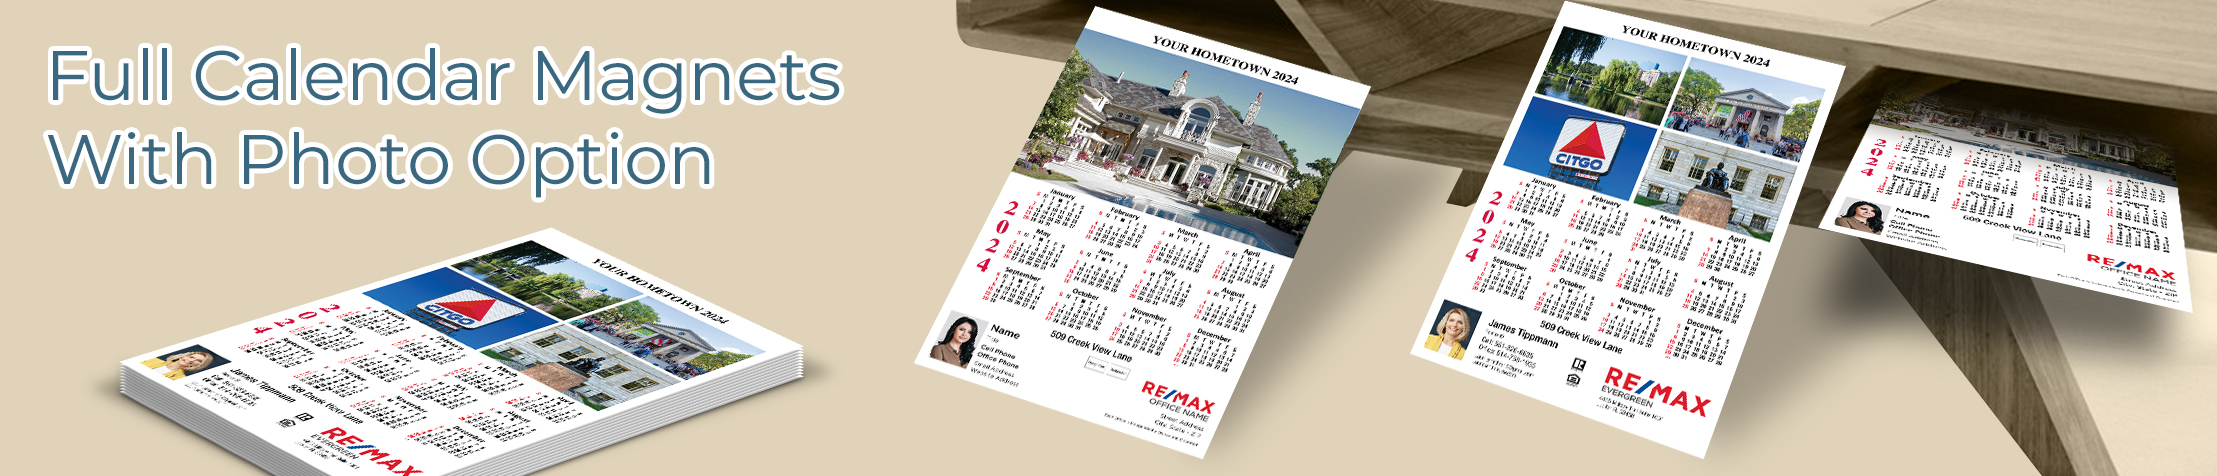 RE/MAX Real Estate Full Calendar Magnets With Photo Option - RE/MAX 2019 calendars, full-color | BestPrintBuy.com